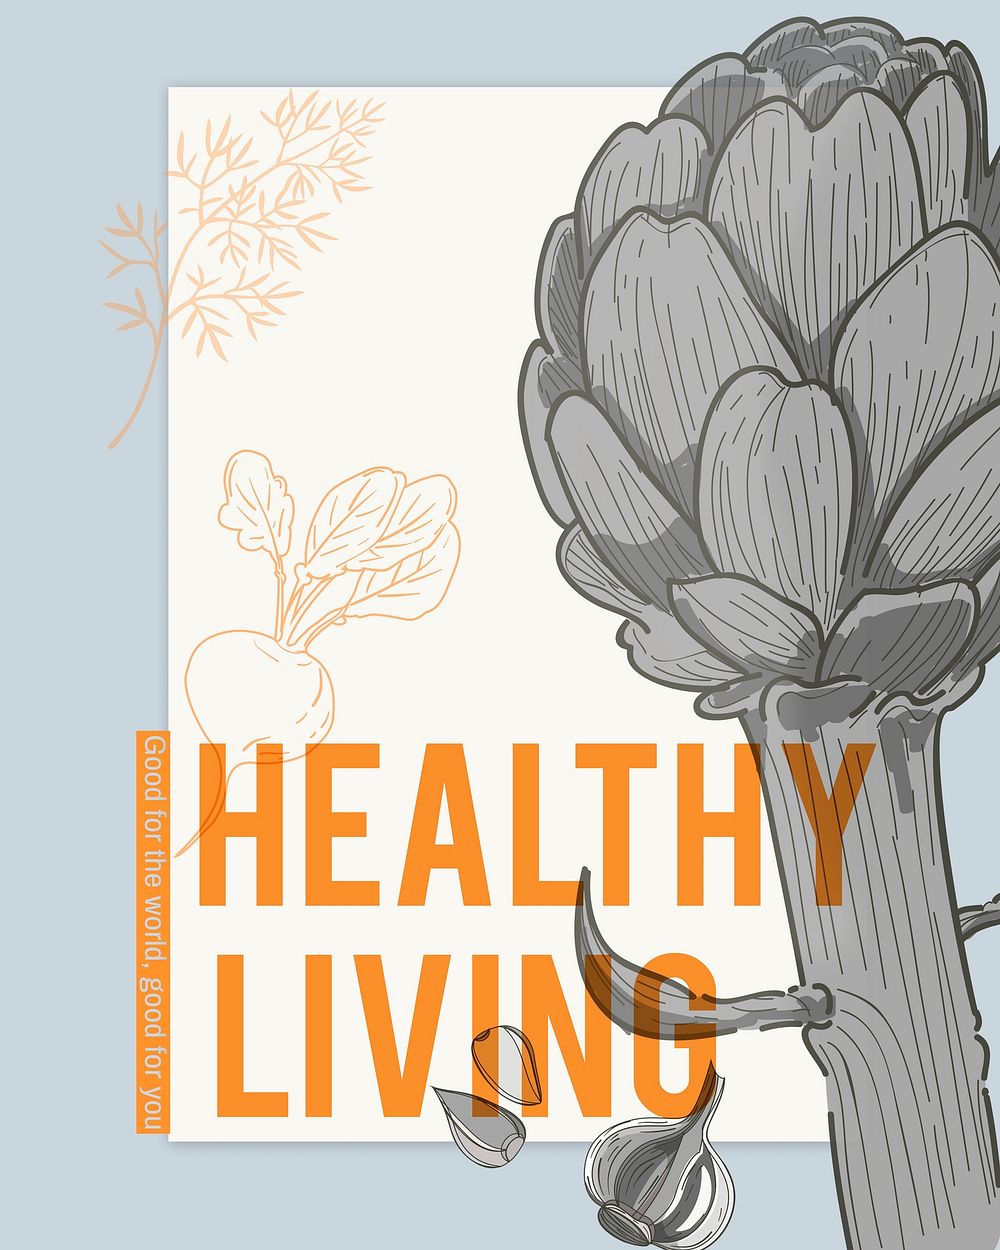 Healthy Living Vitality Wellbeing